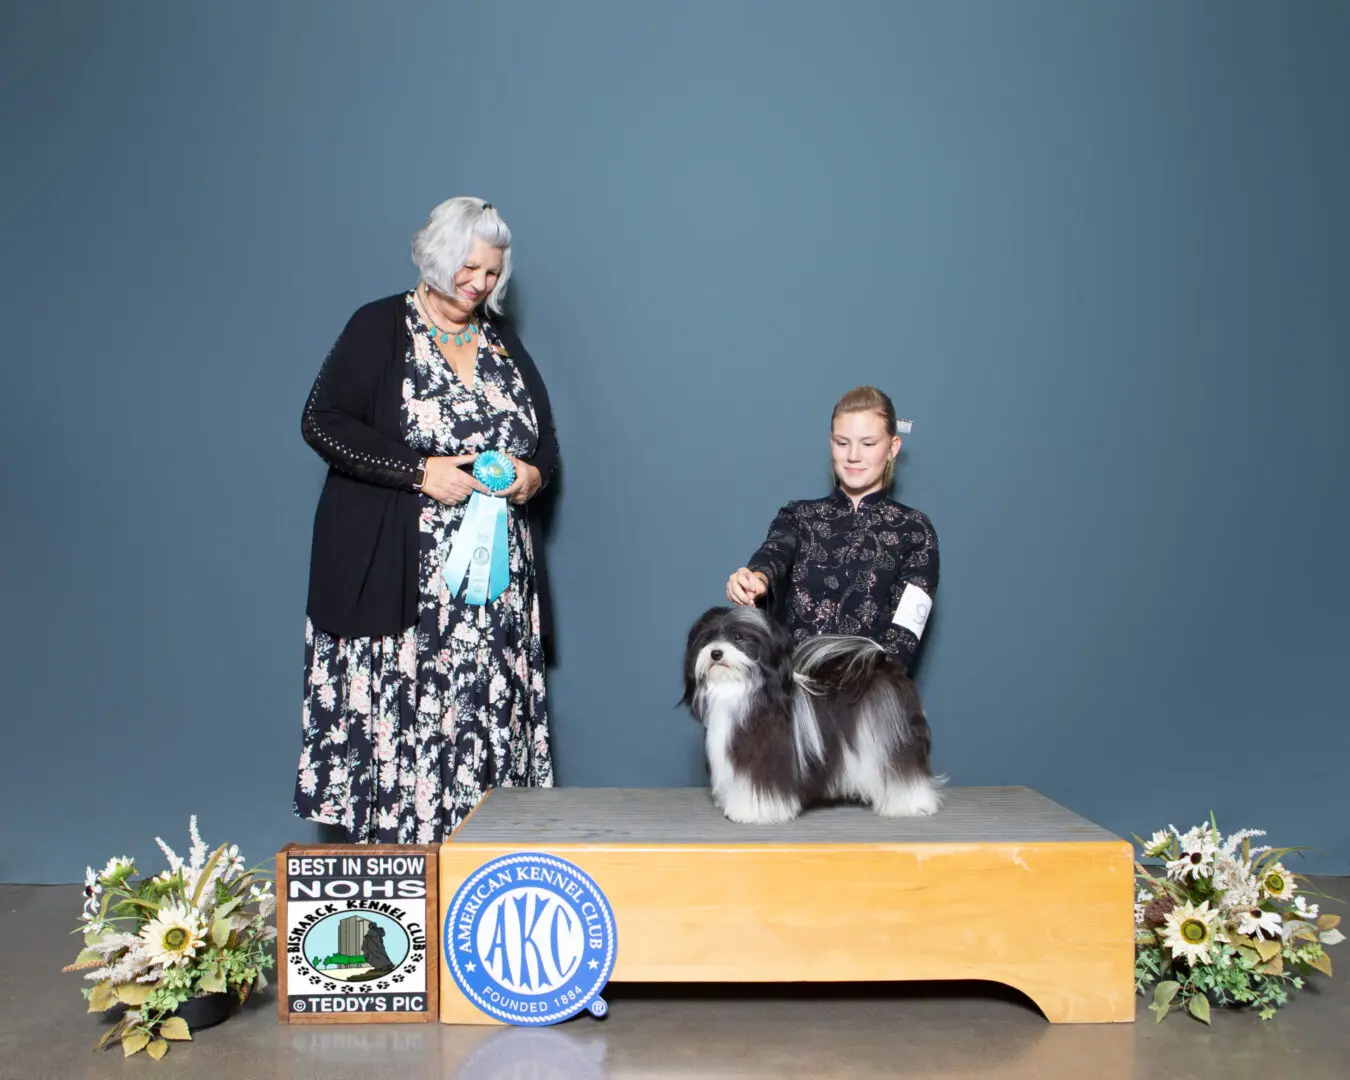 A woman is standing next to a Havanese dog on a podium, showcasing their AKC Championship.